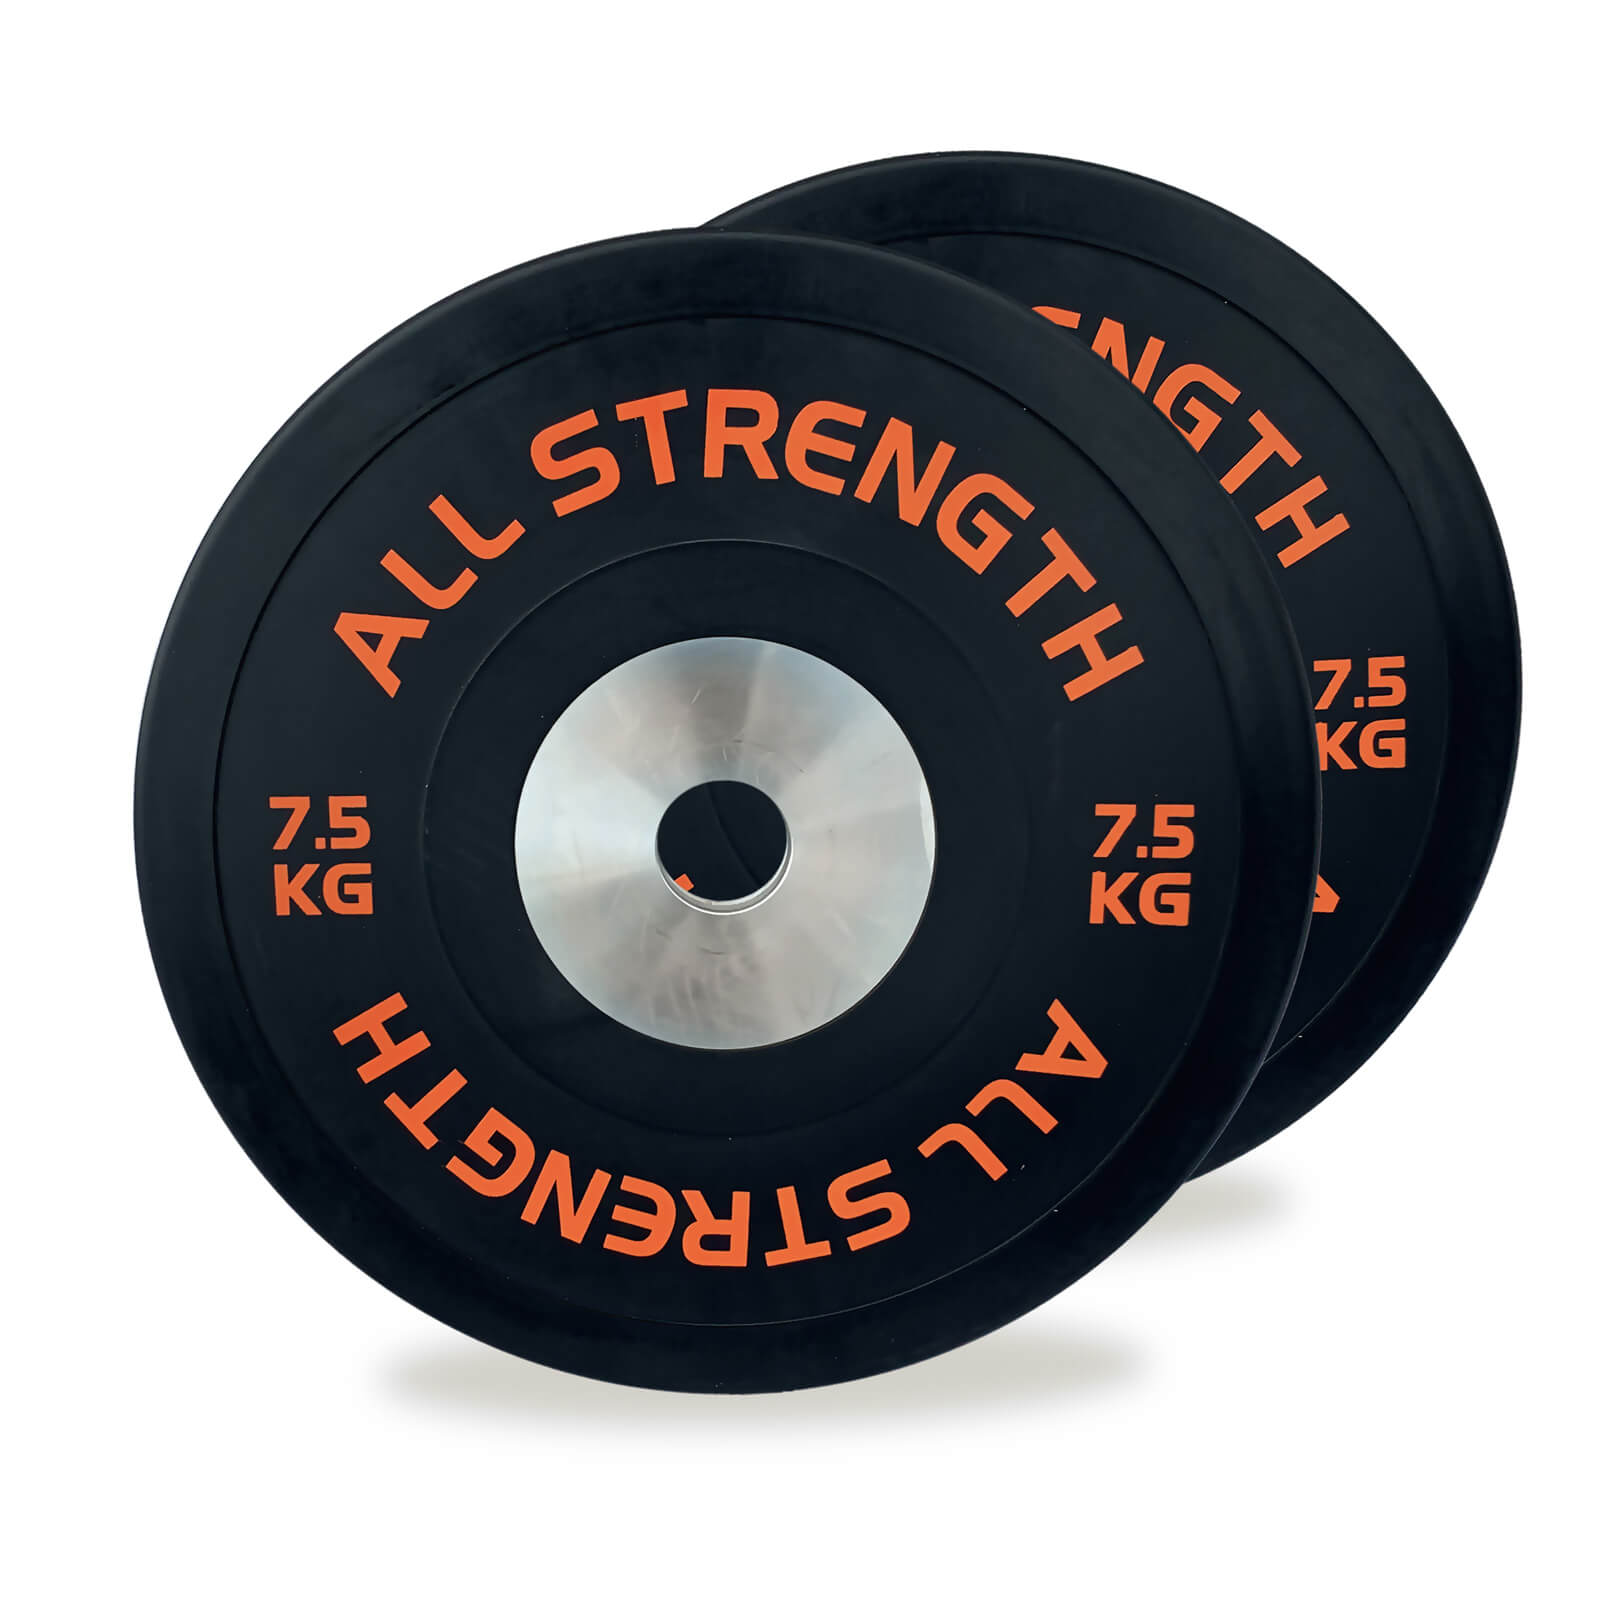 Competition Bumper Plates, 2 x 7.5 kg, AllStrength